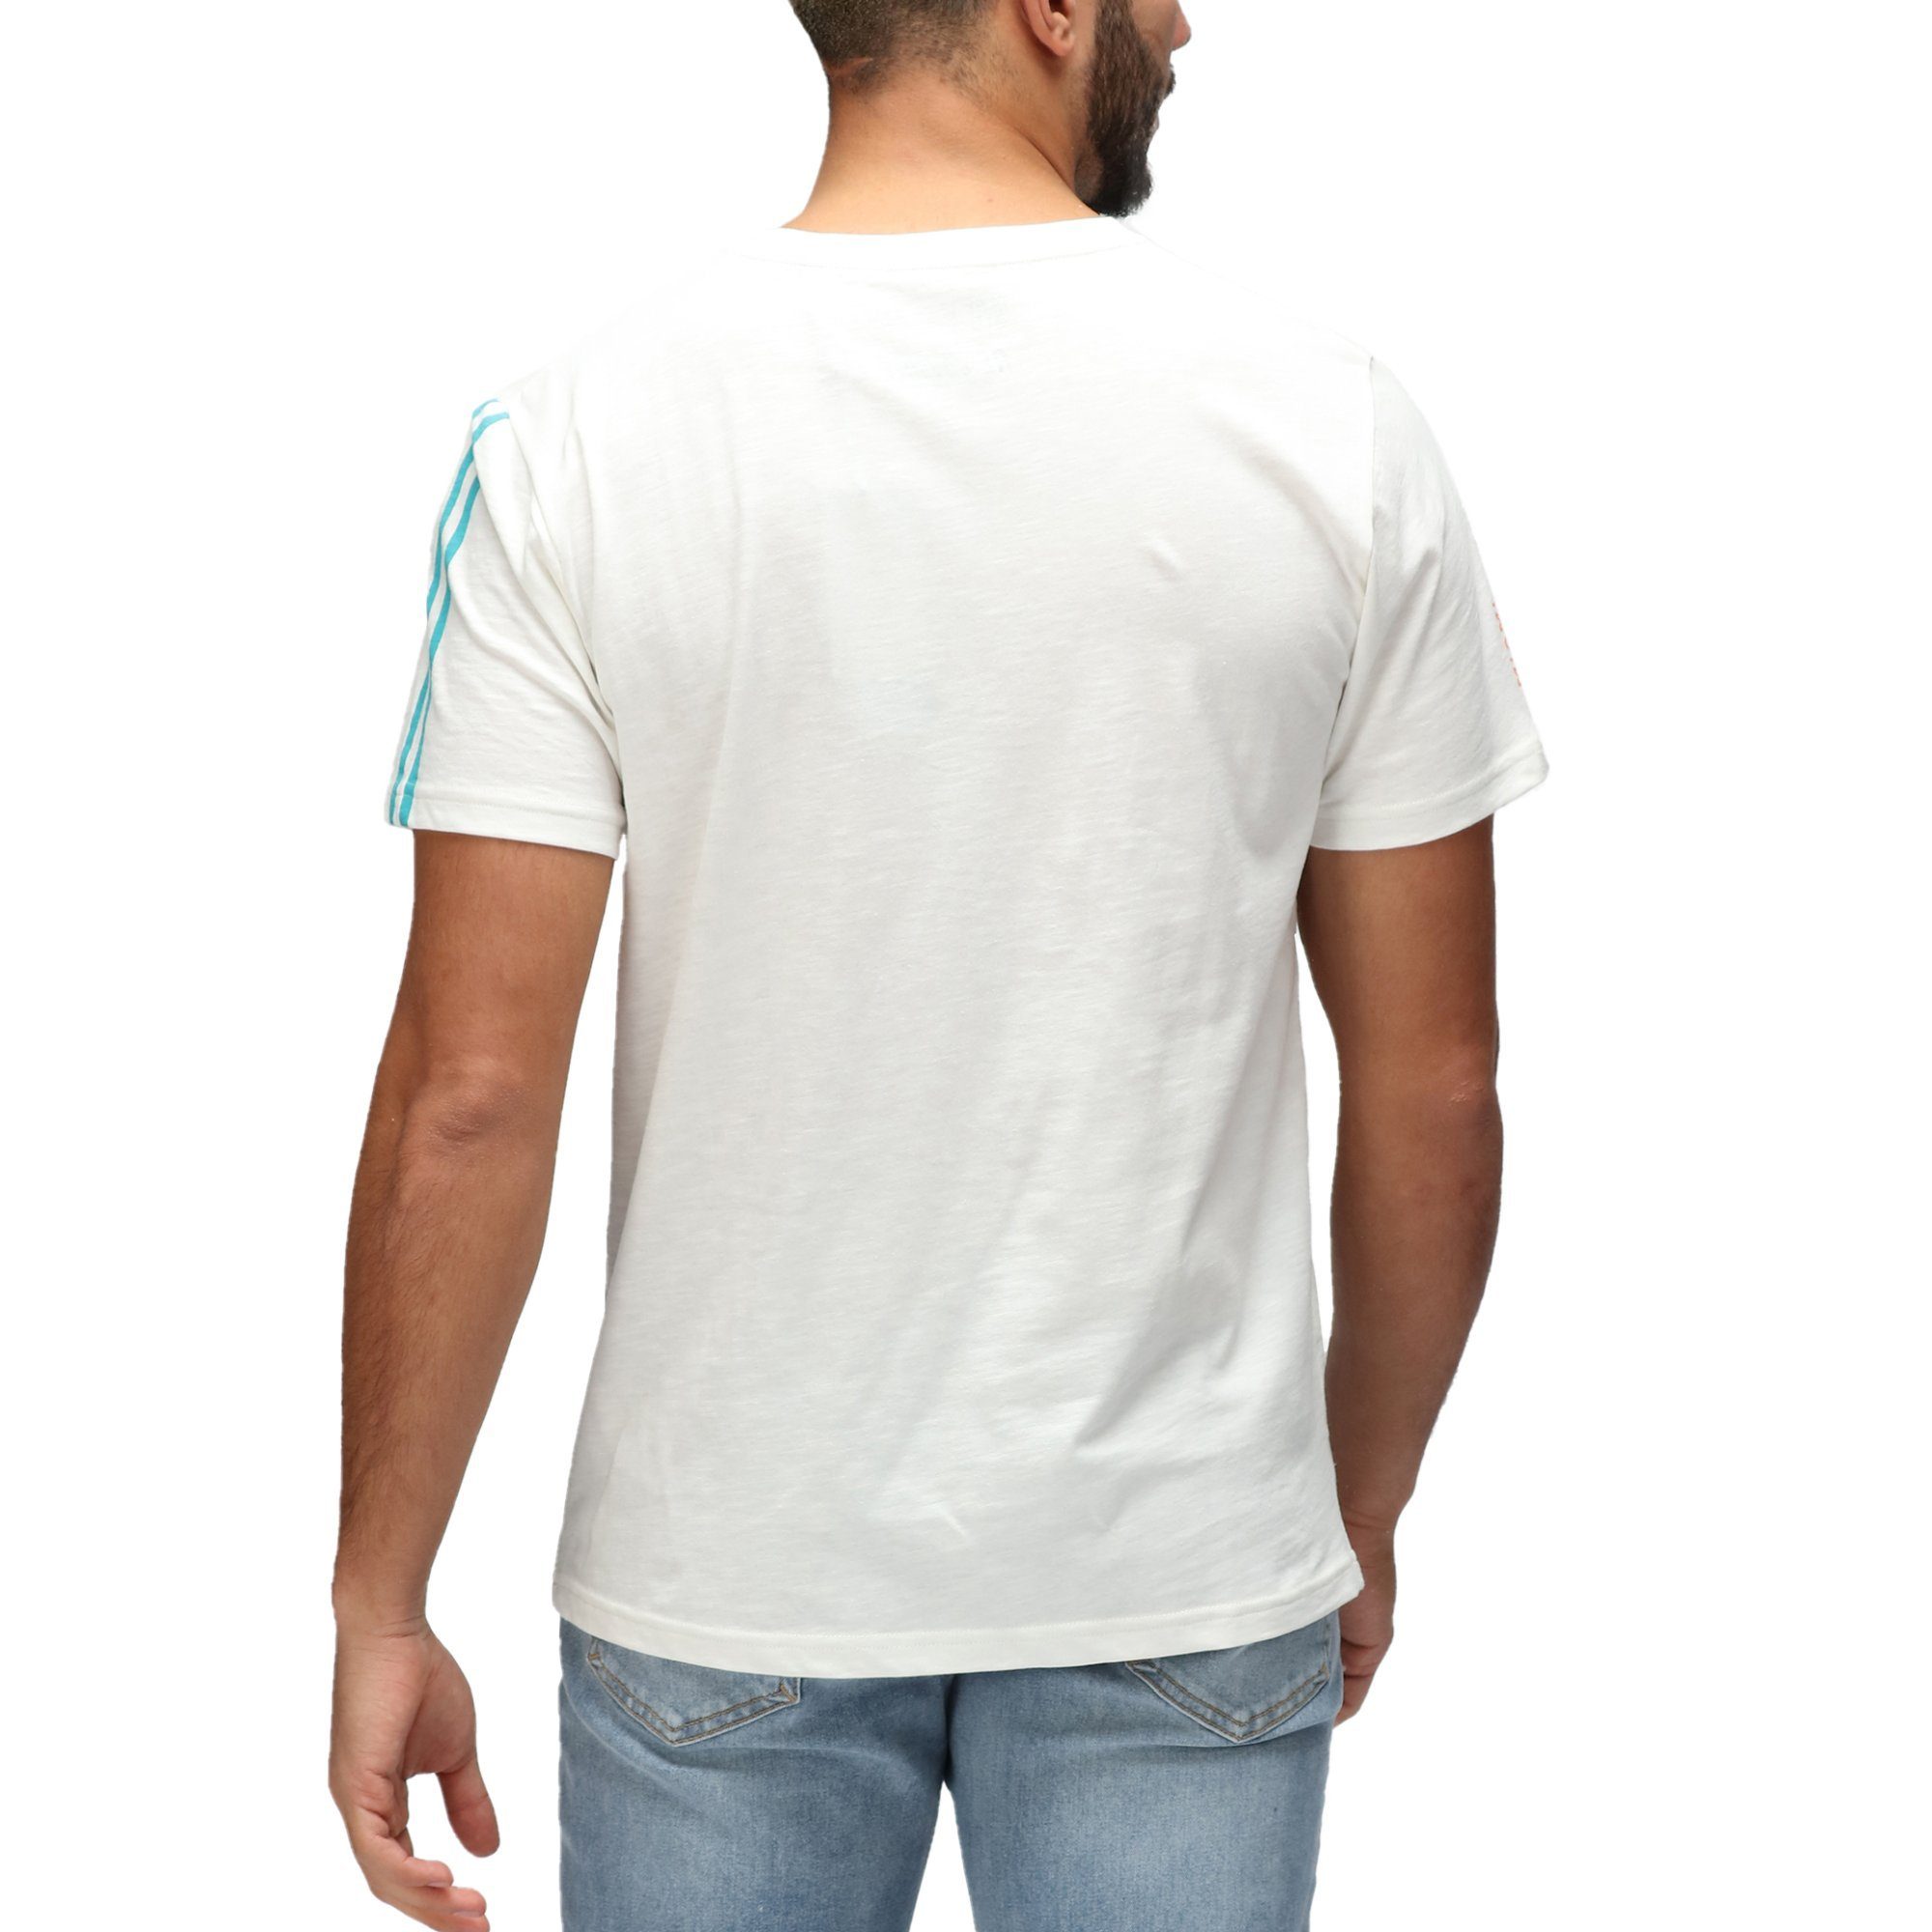 Recovered Print-Shirt Re:Covered NFL ecru Dolphins Miami